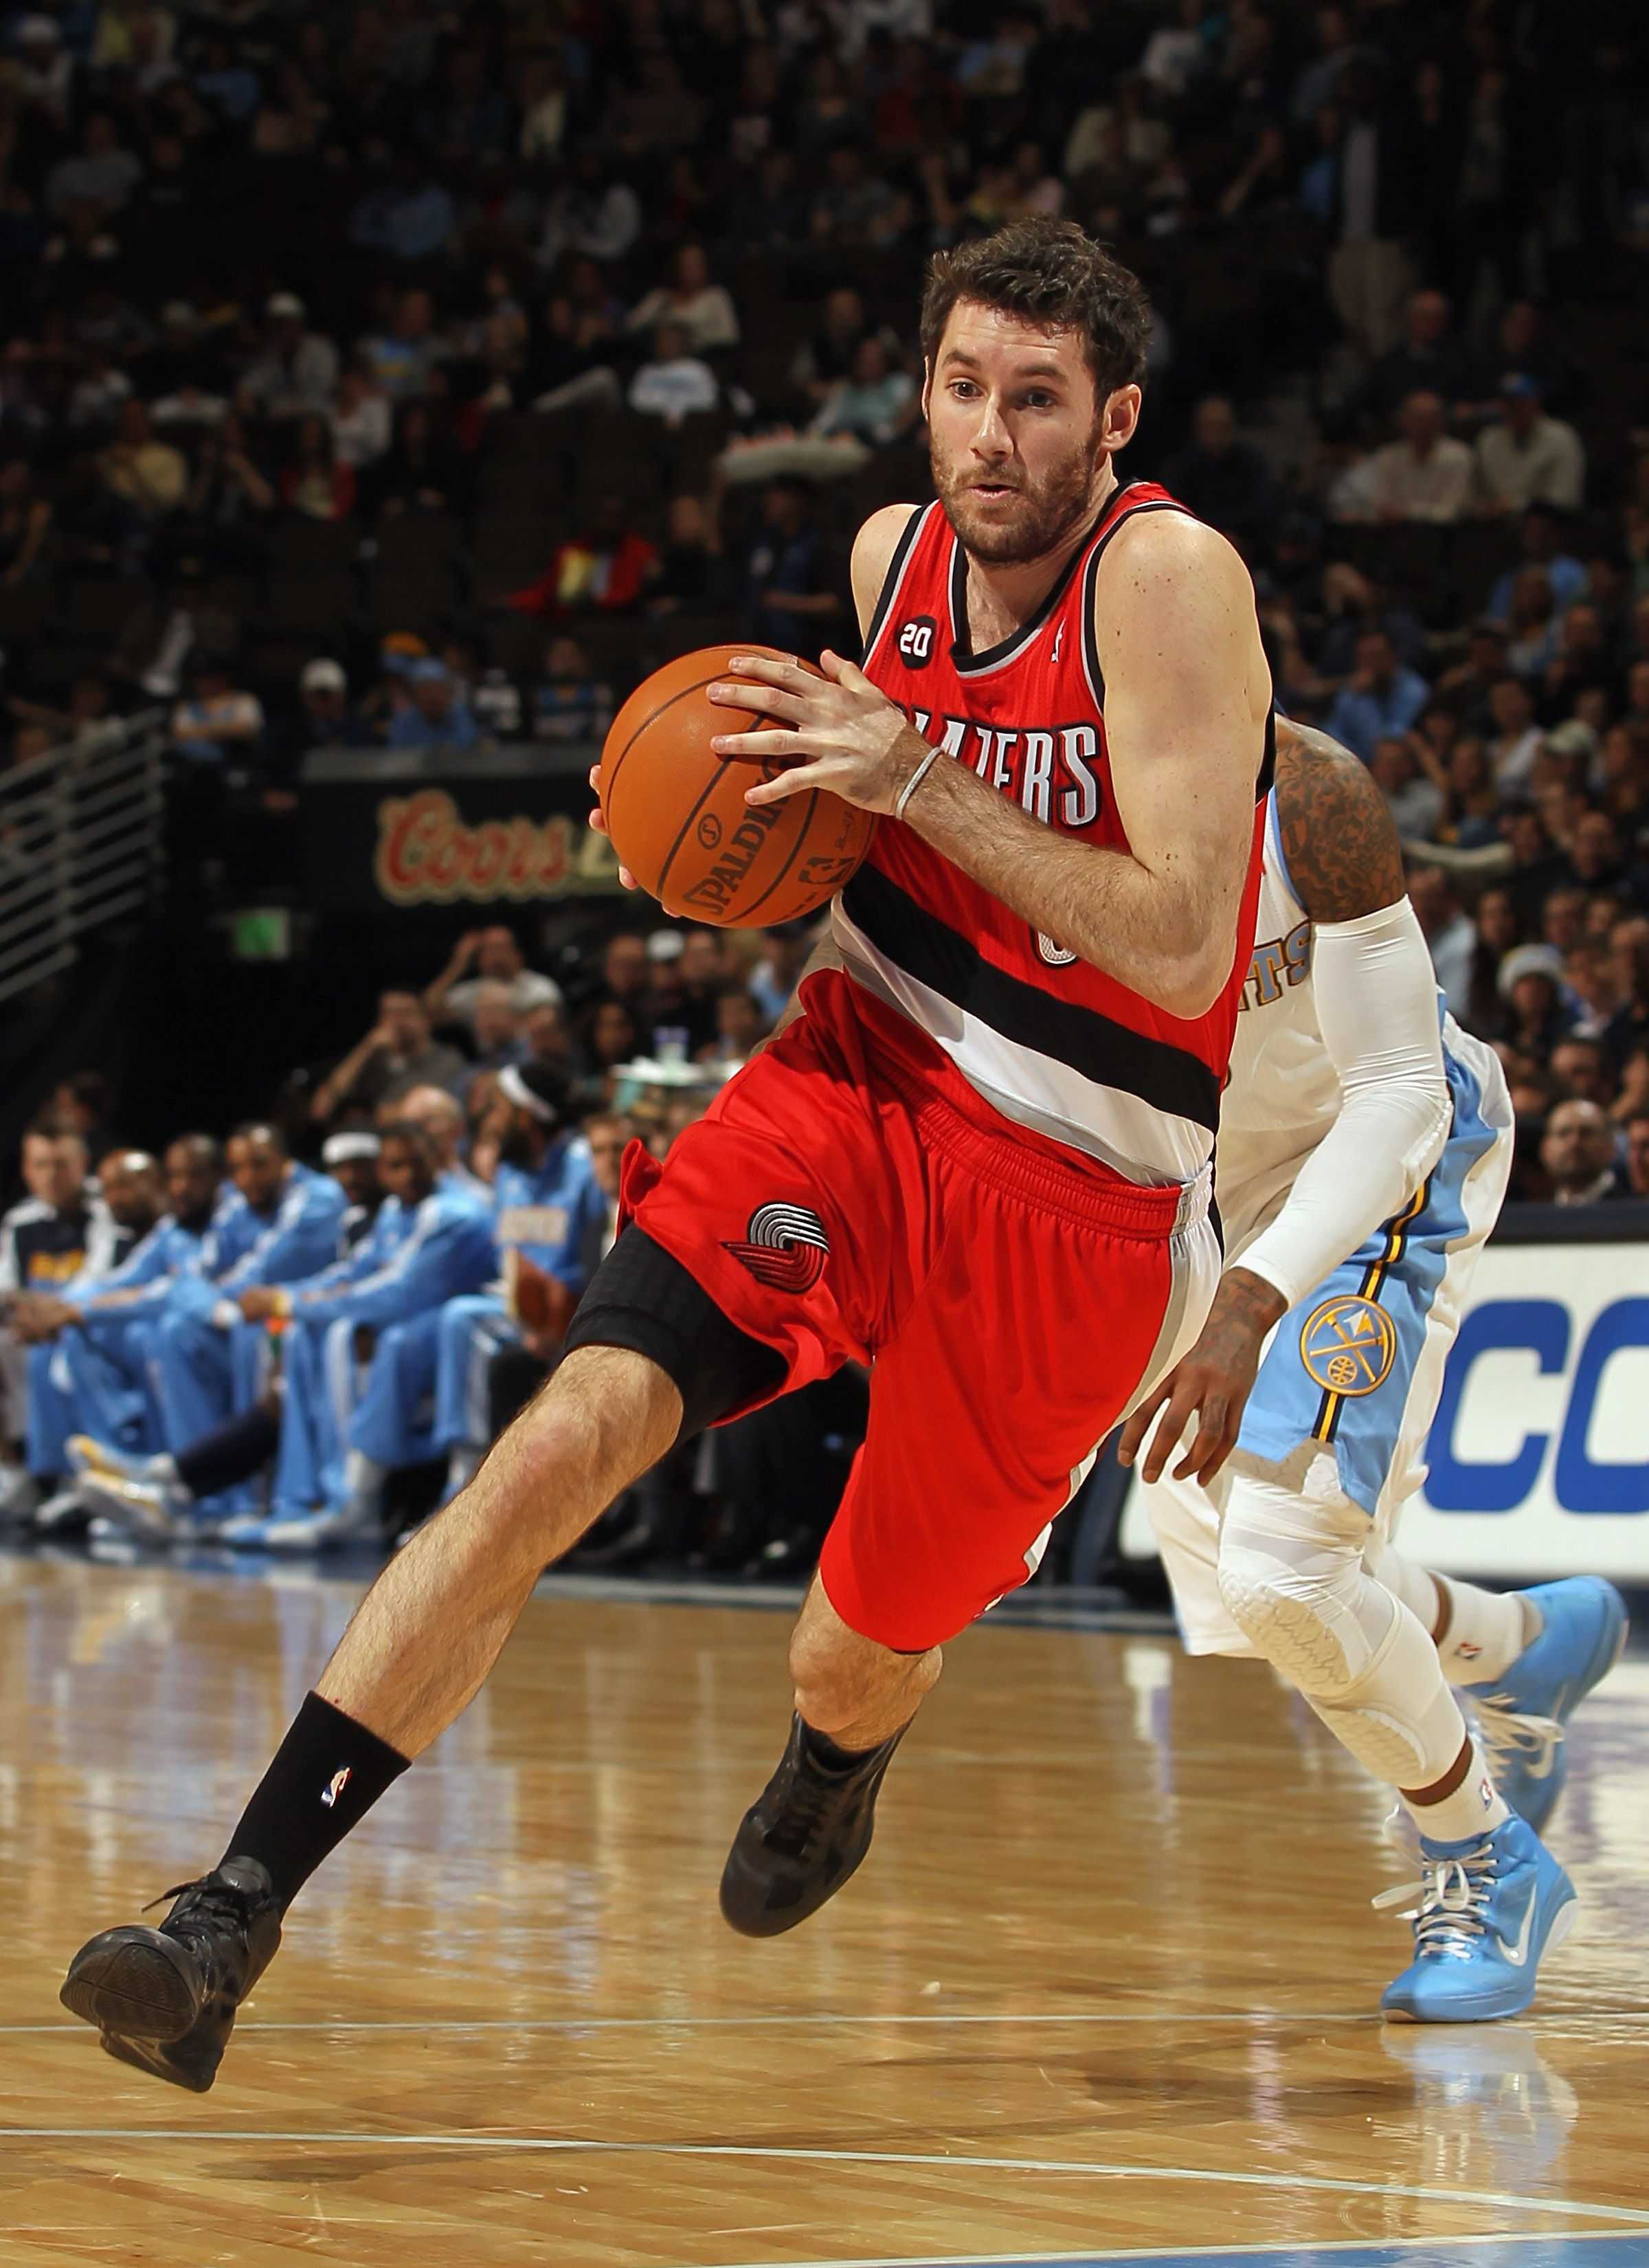 Which basketball shoes Rudy Fernandez wore